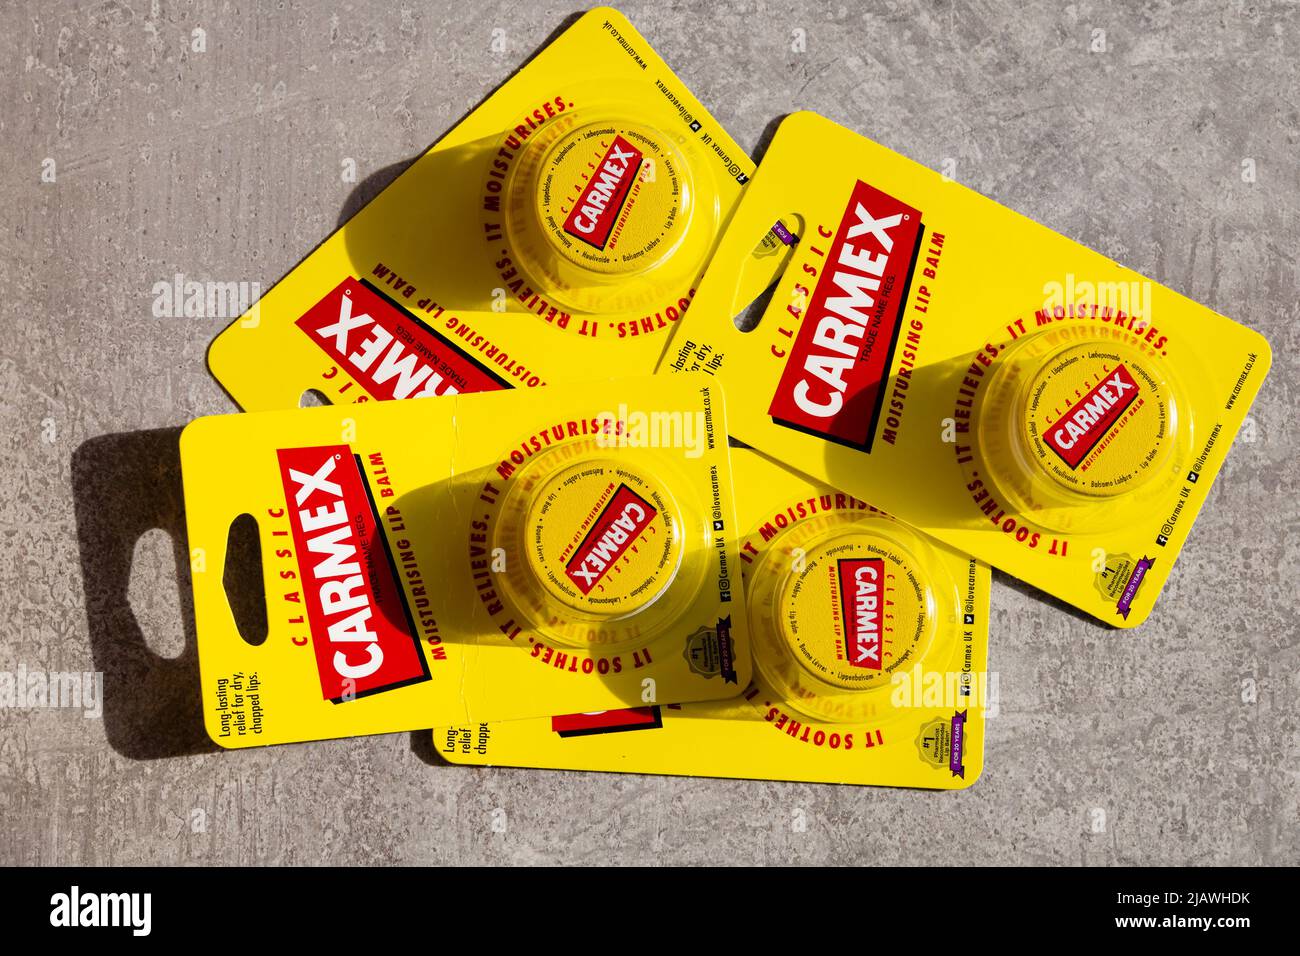 4 packs of classic Carmex moisturising lip balm in bubble packs. Yellow with red logo and writing. Stock Photo